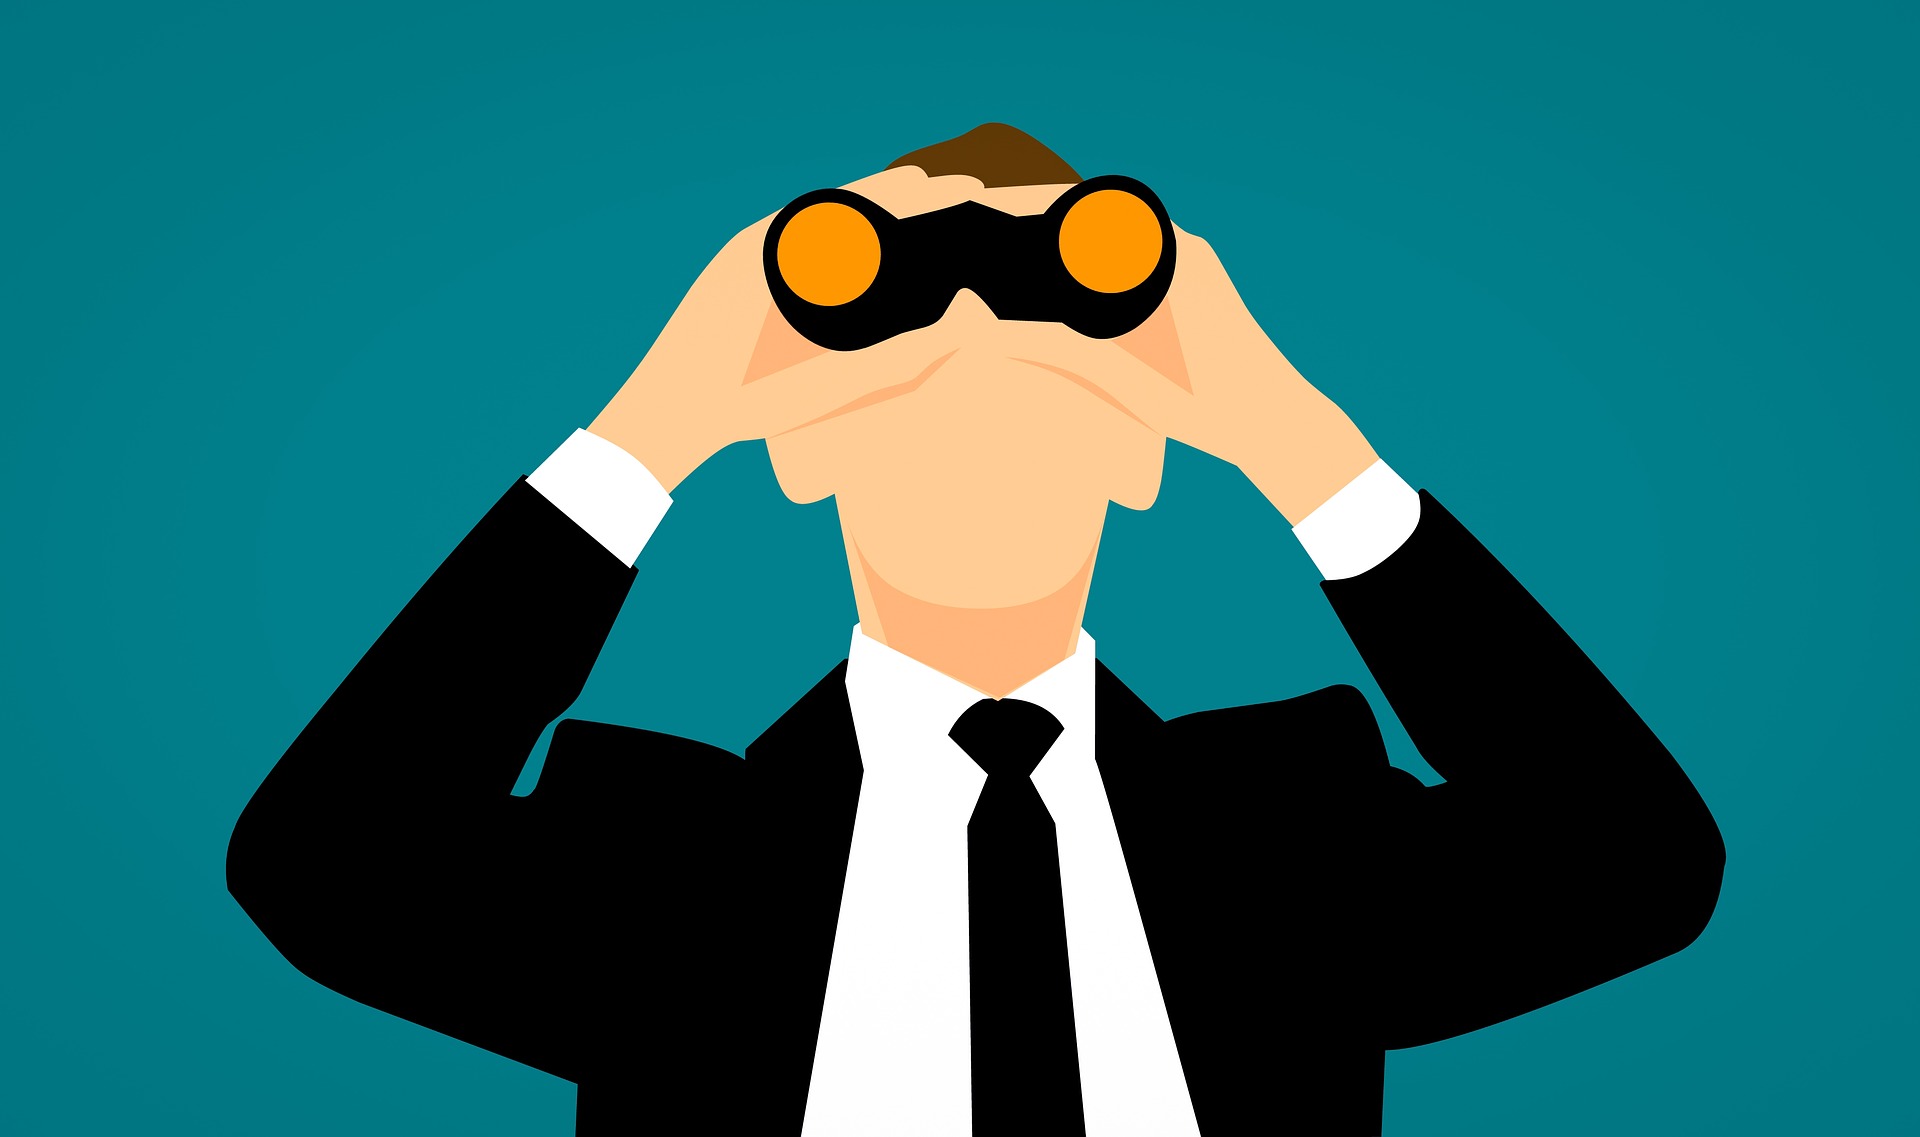 PHOTO: Companies buy, sell, and trade to other private companies. Man in suit, looking up with binoculars. Graphic courtesy of Muhamod Hussan on Pixabay. SOURCE: https://pixabay.com/illustrations/observe-monitoring-spy-search-job-3539810/